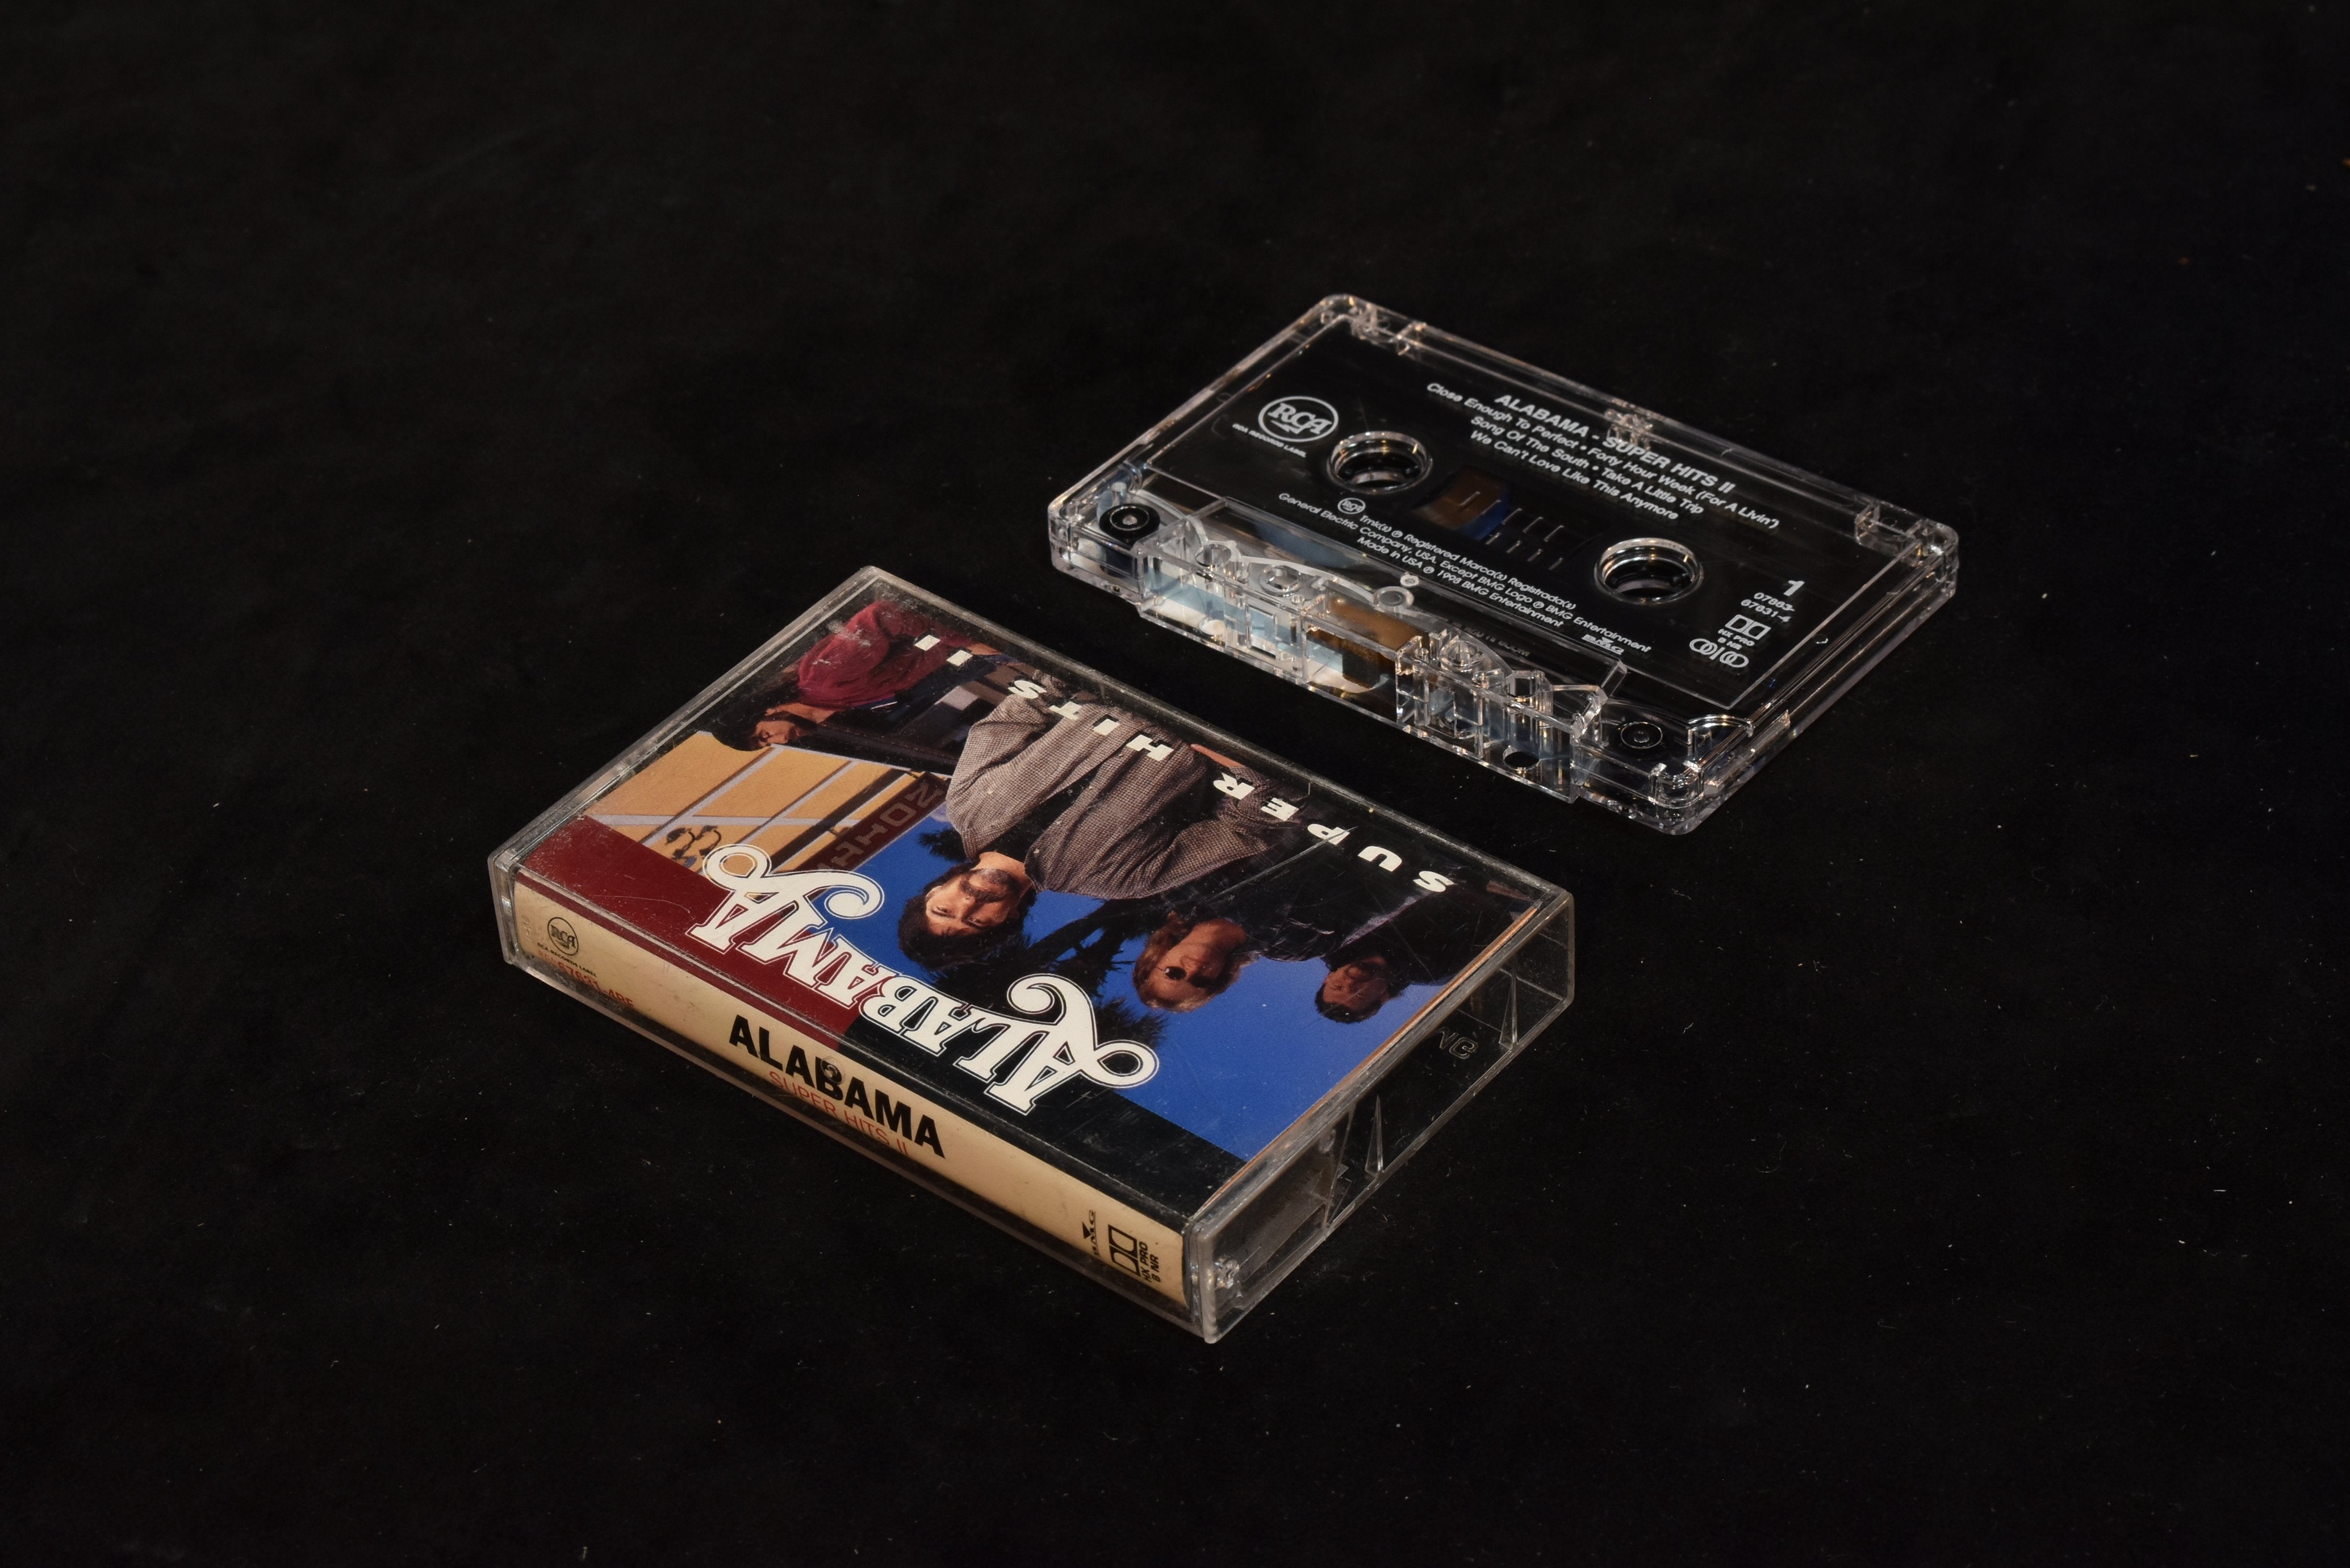 Alabama super hits two cassette tape used